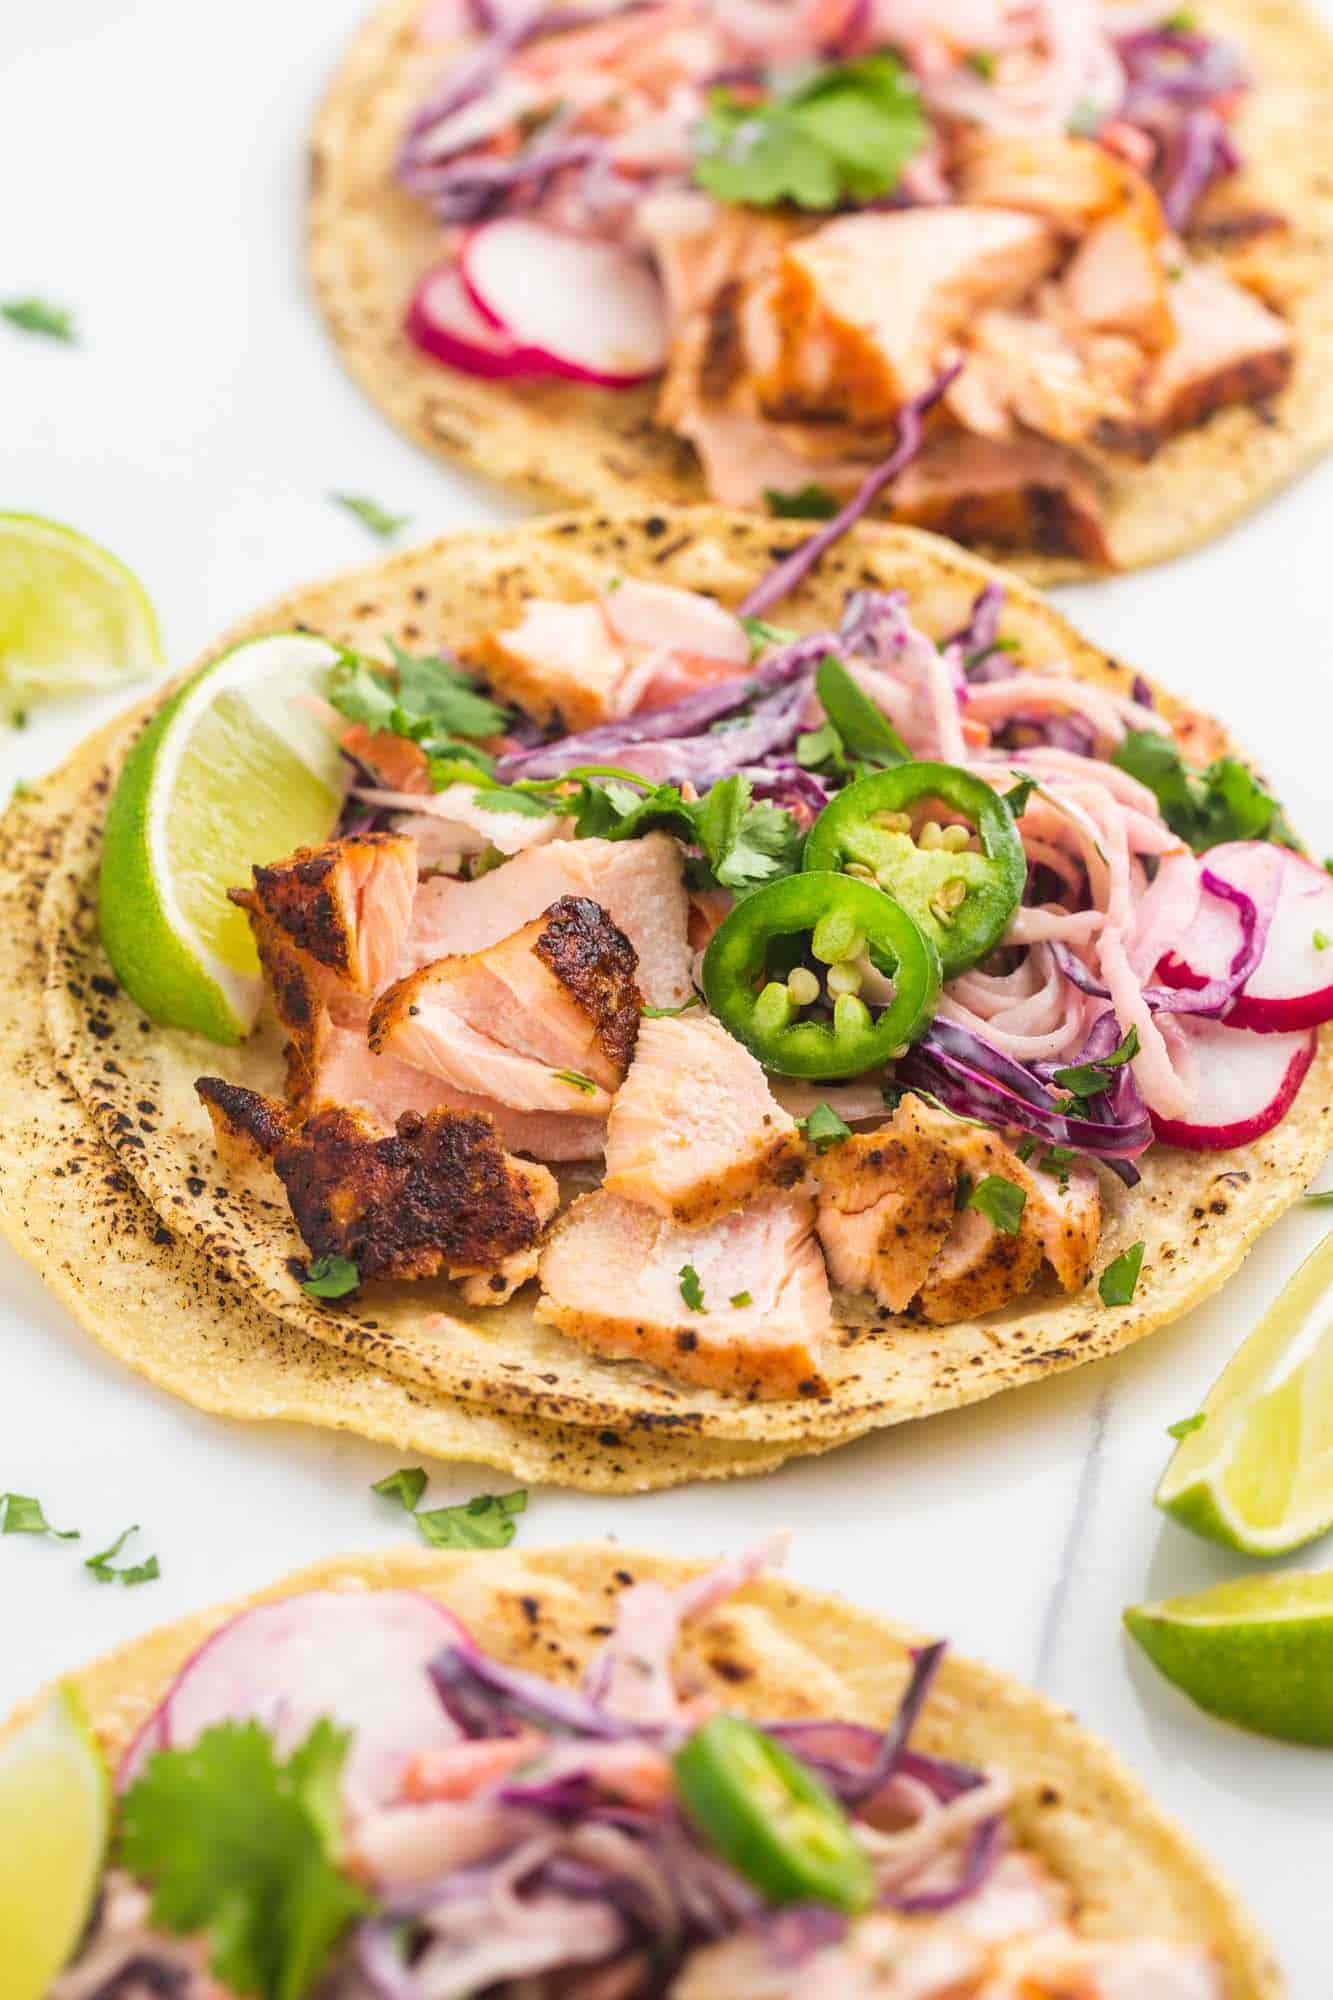 Three salmon tacos with toppings on a cutting board, open-faced.